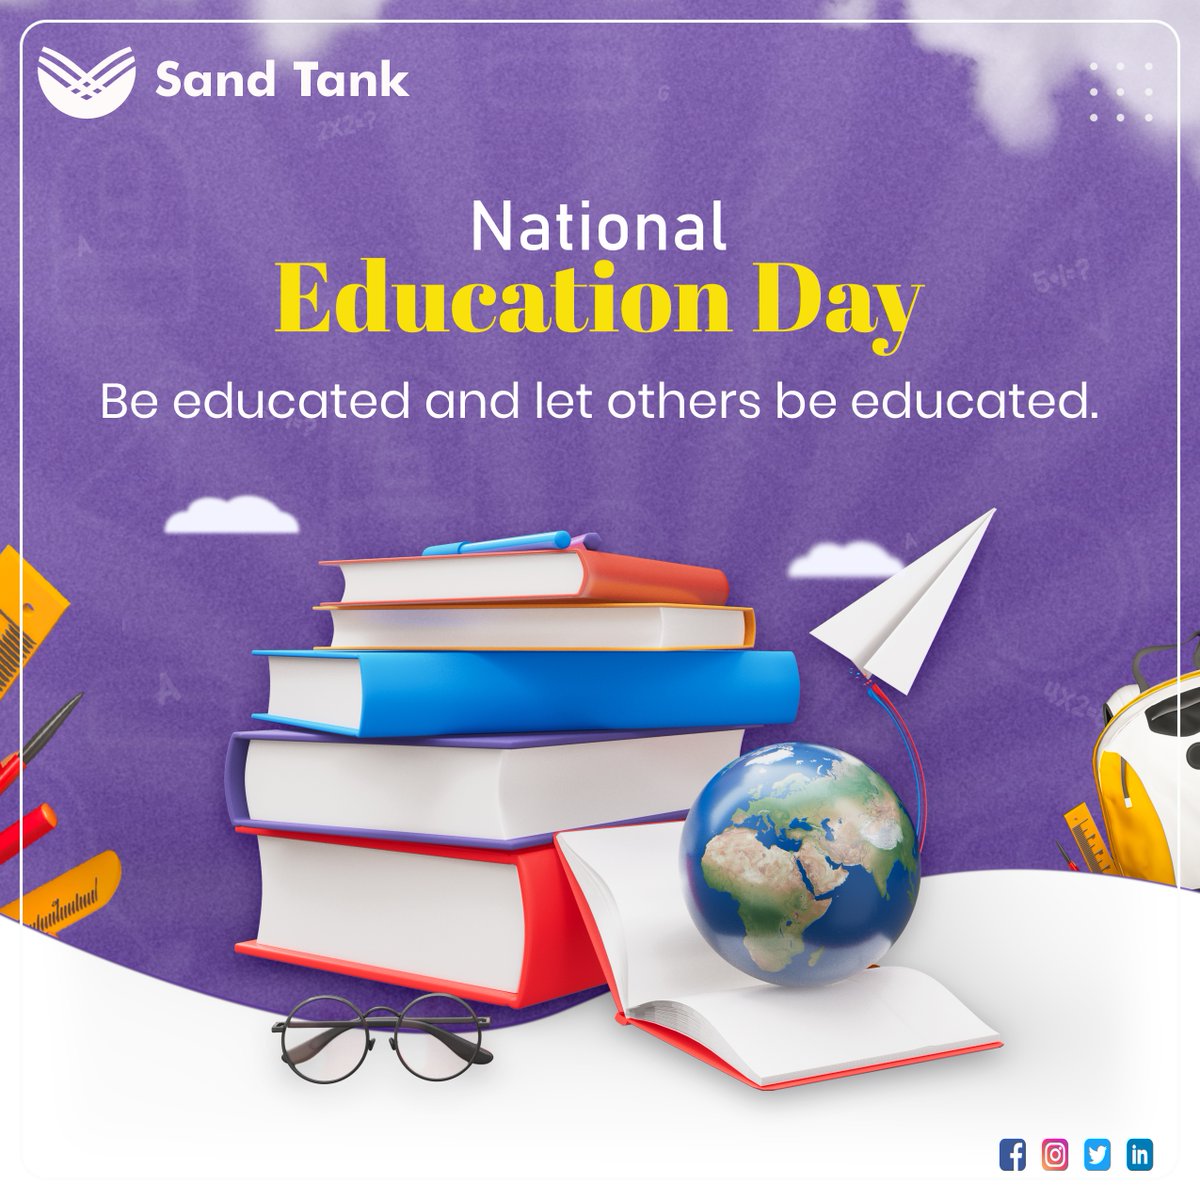 When you educate a child, you change not just his present but all his life for good. Wishing a very Happy National Education Day to all.

#Sandtankfoundation #NationalEducationDay #EducationForAll #KnowledgeIsPower #EducationalEquality #QualityEducation #LearningMatters